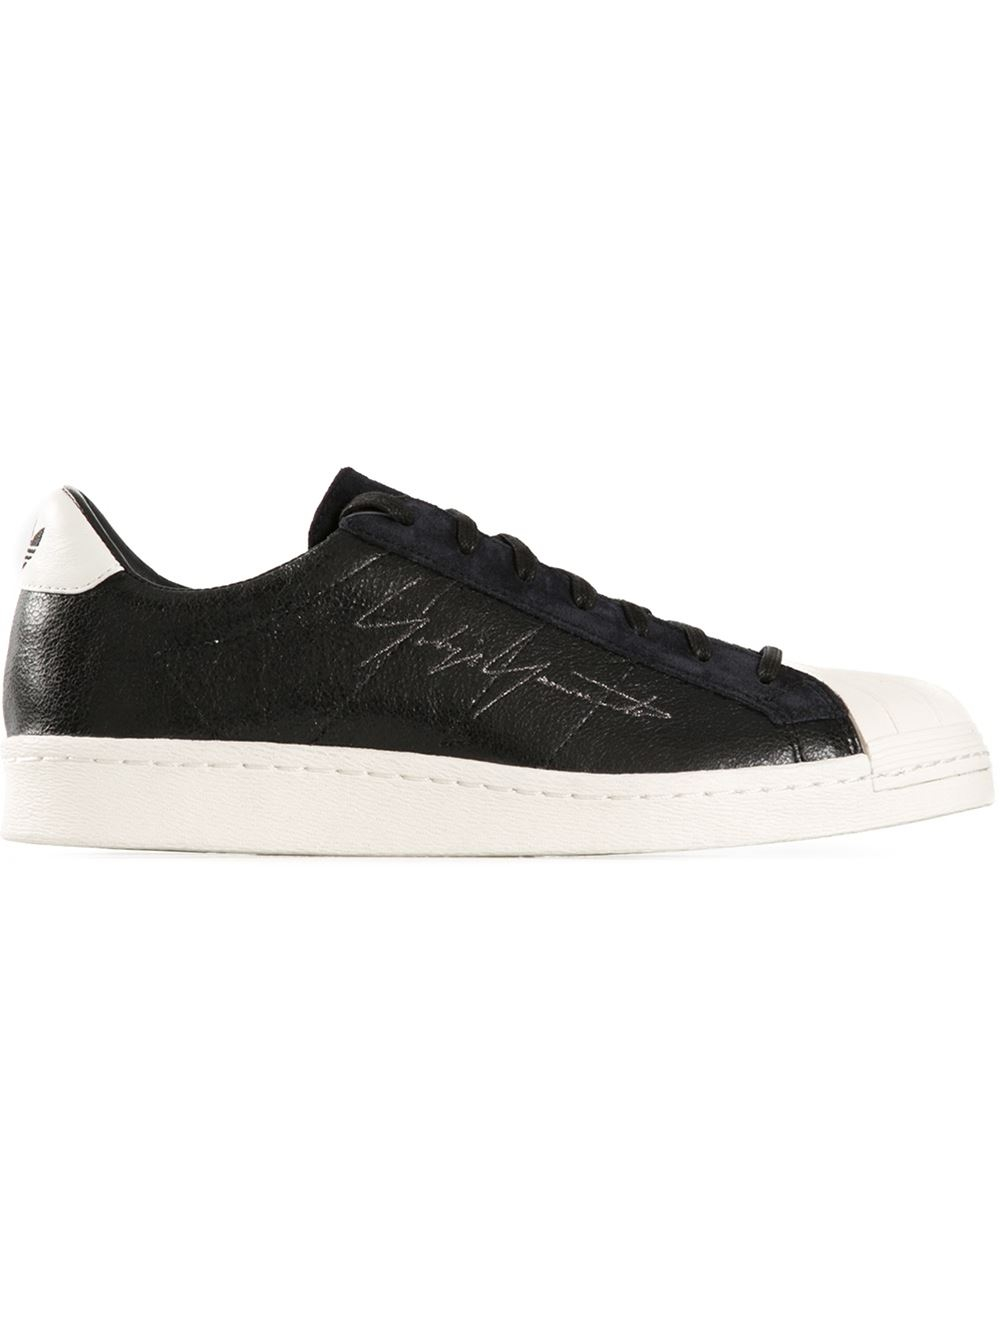 Yohji Yamamoto X Adidas Signature Lace Up Sneakers in Black for Men | Lyst